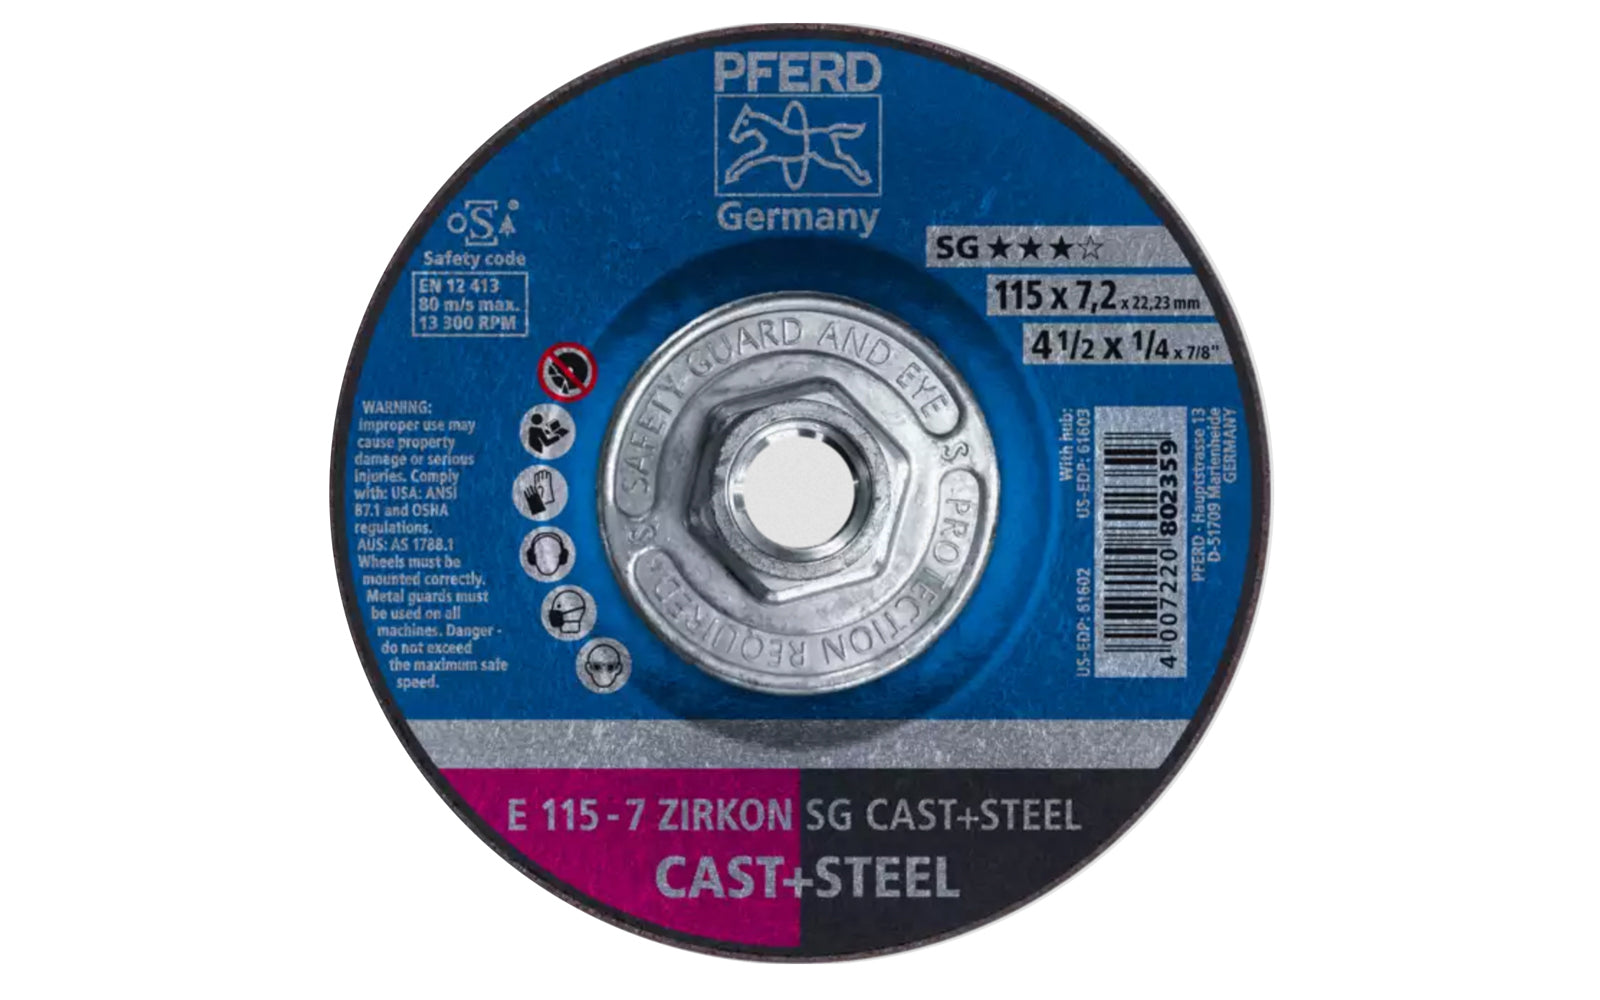 High quality 4-1/2" Zirconium Grinding Wheel made by Pferd in Germany. Model 61603. Zirconia alumina (Zirconium) grinding wheel is designed for steels & cast iron with excellent material removal rate. Fast cutting. 4-1/2" diameter. 5/8-11" threaded hub. 1/4" thickness of blade. 4007220692721. Made in Germany.